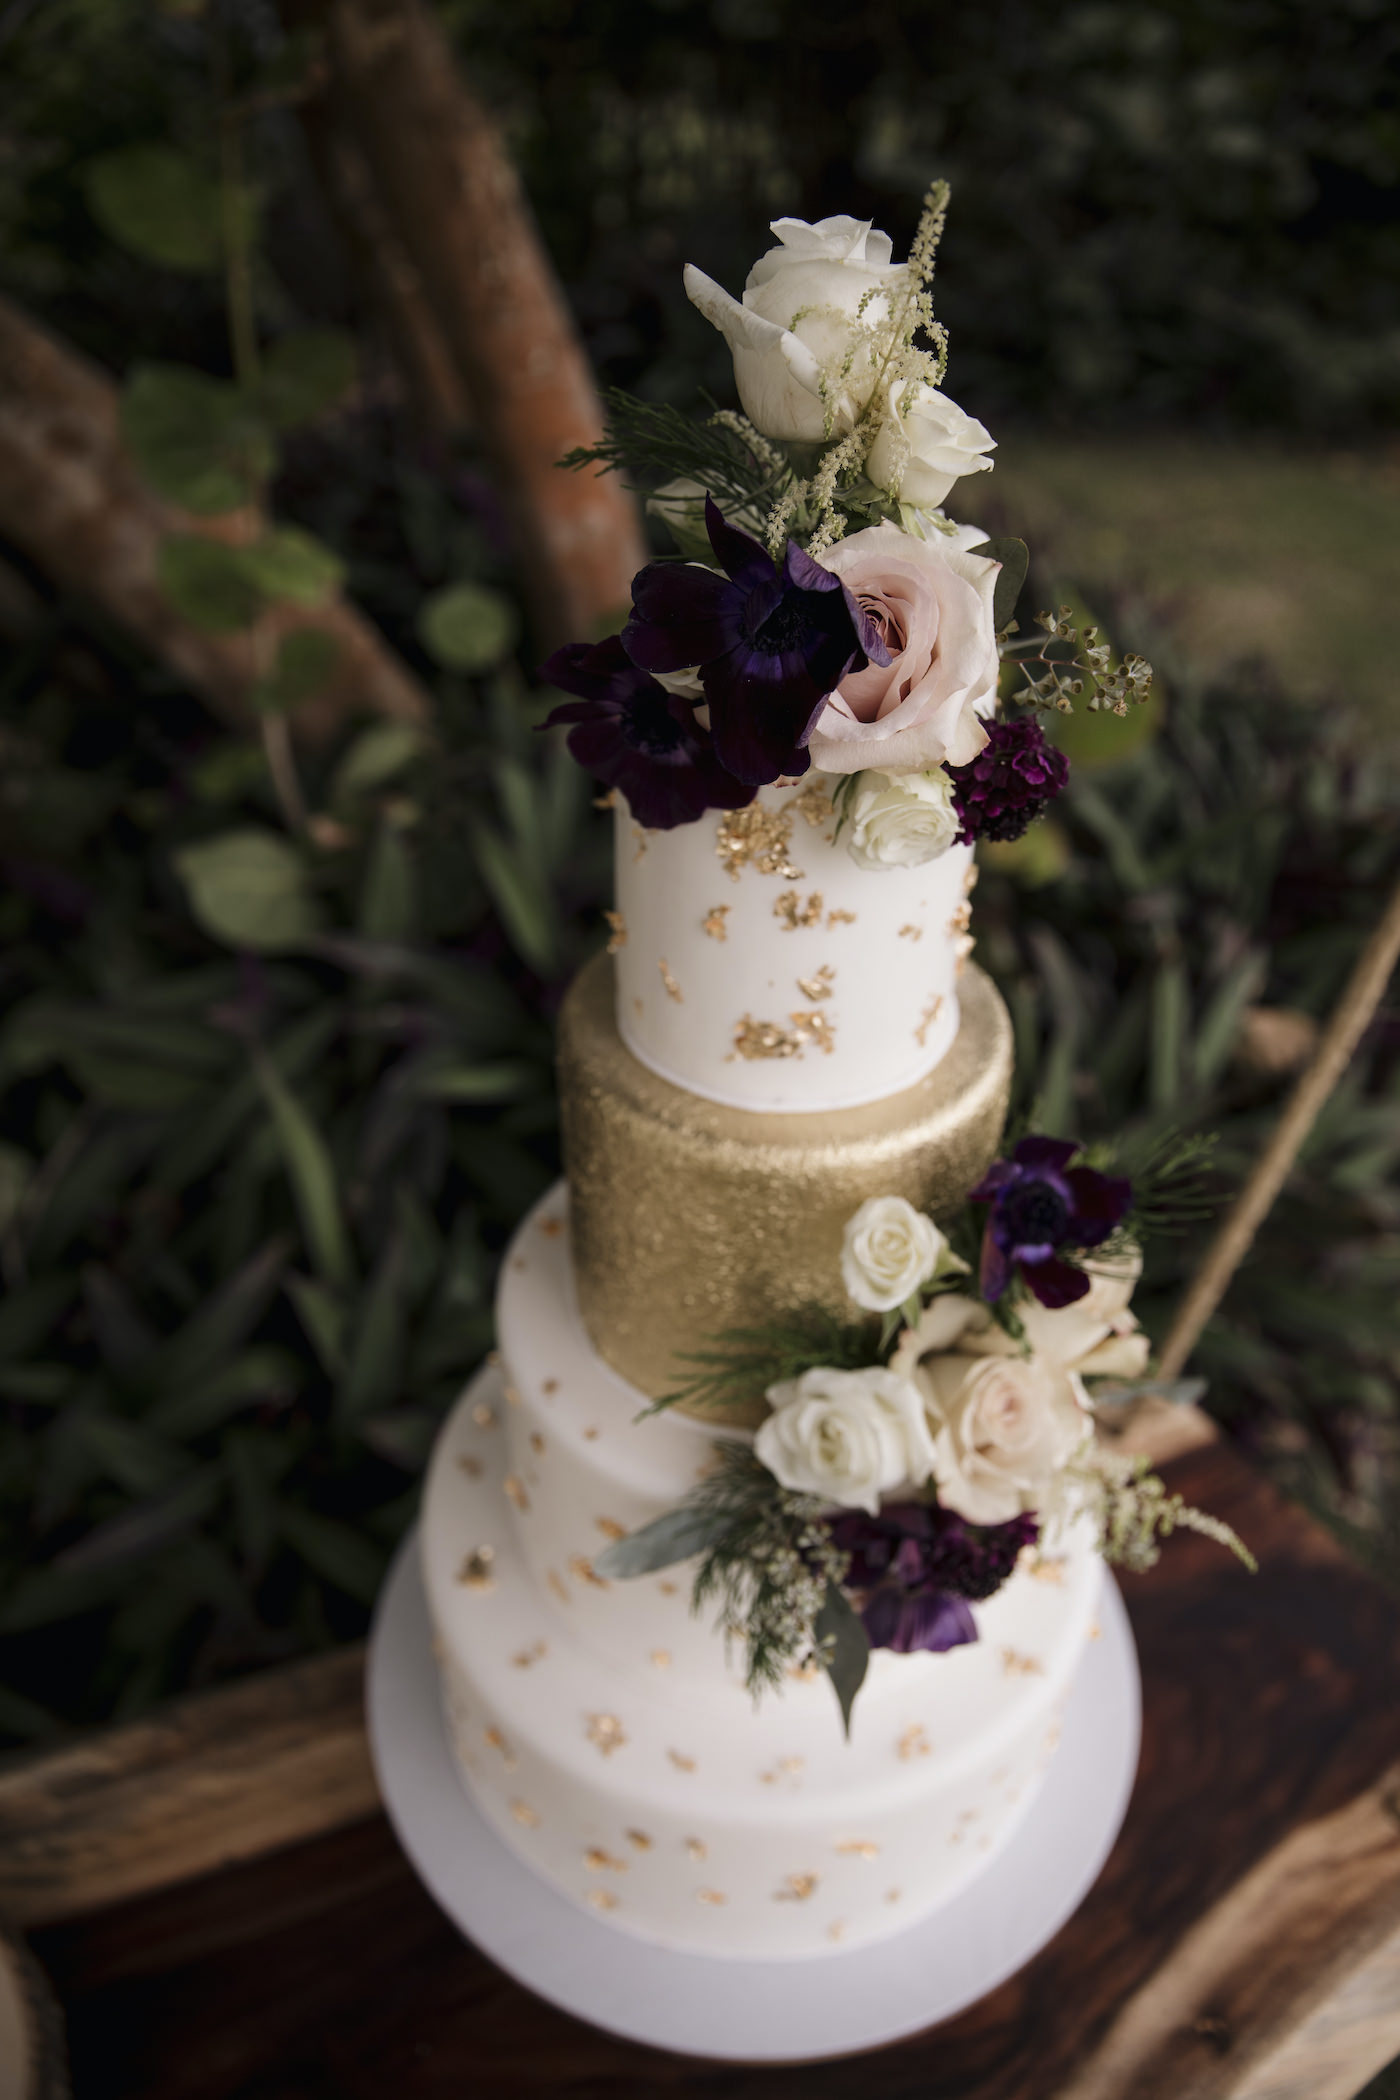 Four Tier Wedding Cake with Gold Leaf and Fresh Flowers | Deep Red Maroon Purple and Blush Pink Anemone with White Roses and Astilbe and Greenery Cake Topper